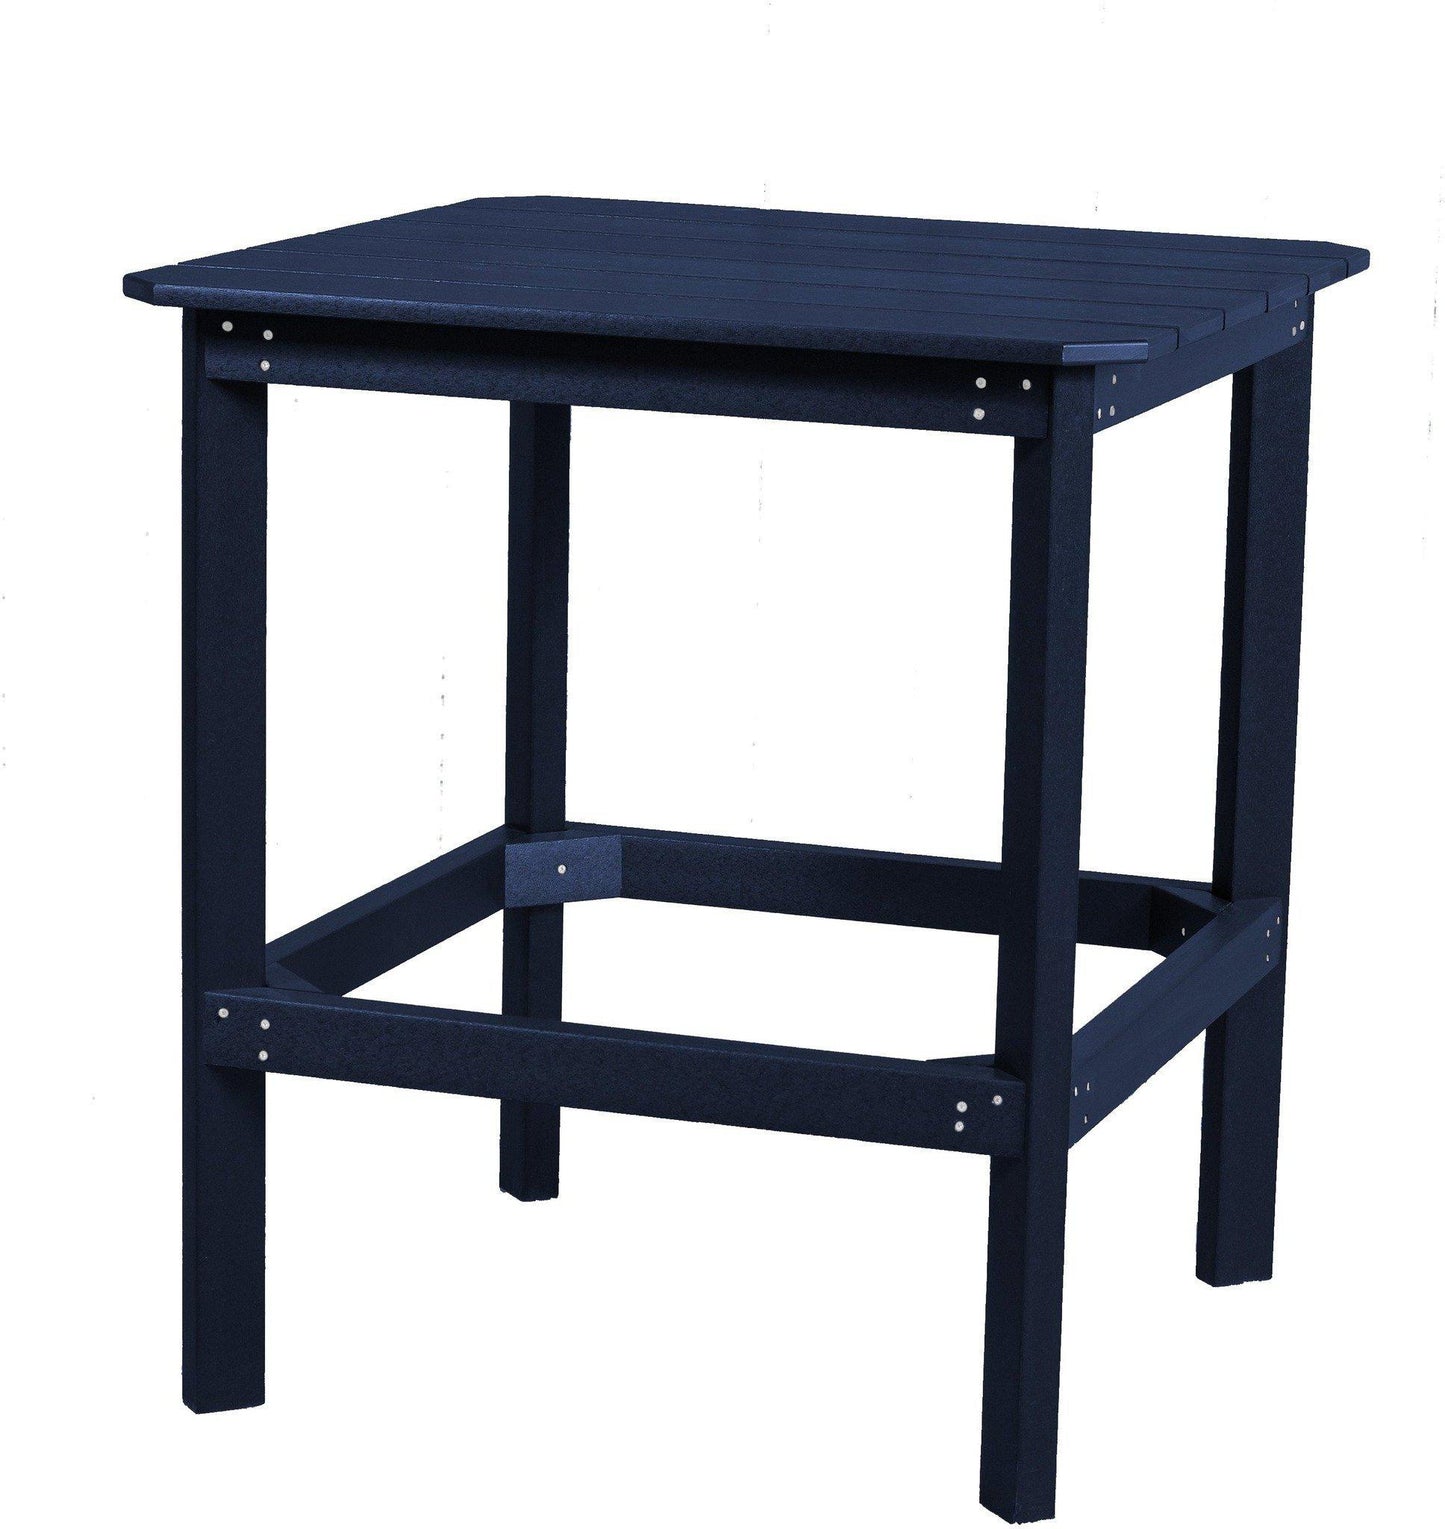 Wildridge Heritage Recycled Plastic Outdoor 36" High Dining Table (COUNTER HEIGHT) - LEAD TIME TO SHIP 3 WEEKS